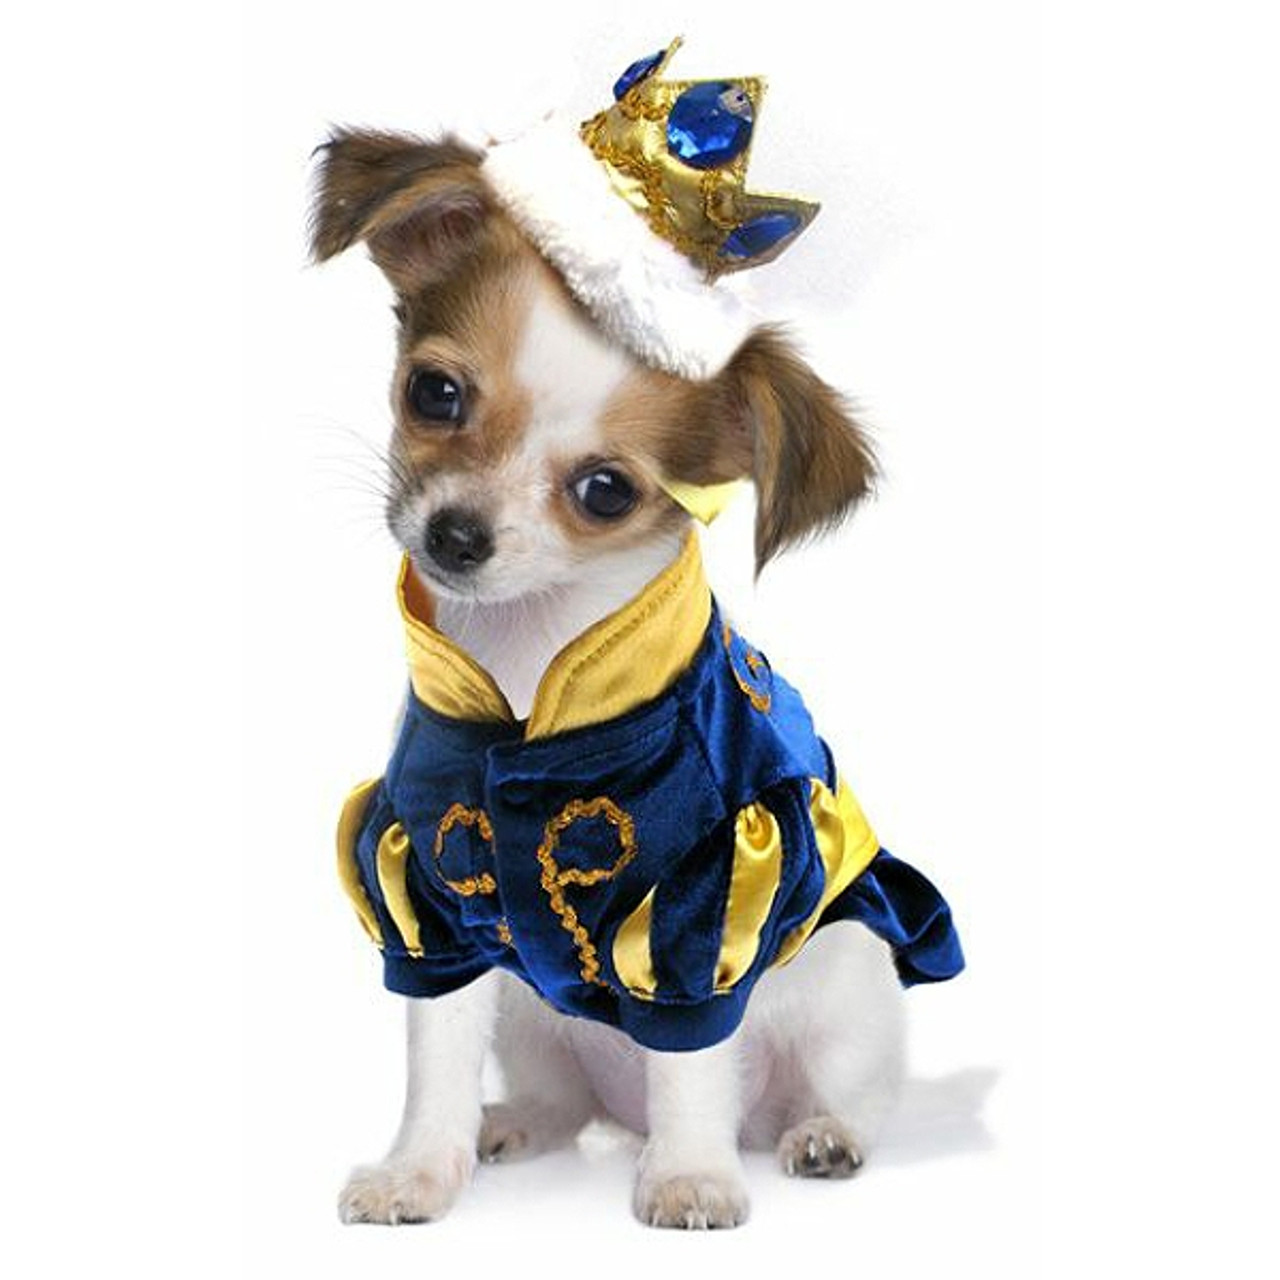 Pet Dog Winter Clothes Female Dog Hoodie Dresses Thermal Skirt Puppy Girl  Doggie Princess Warm Dress Thick Jacket Outfits Coat Apparel